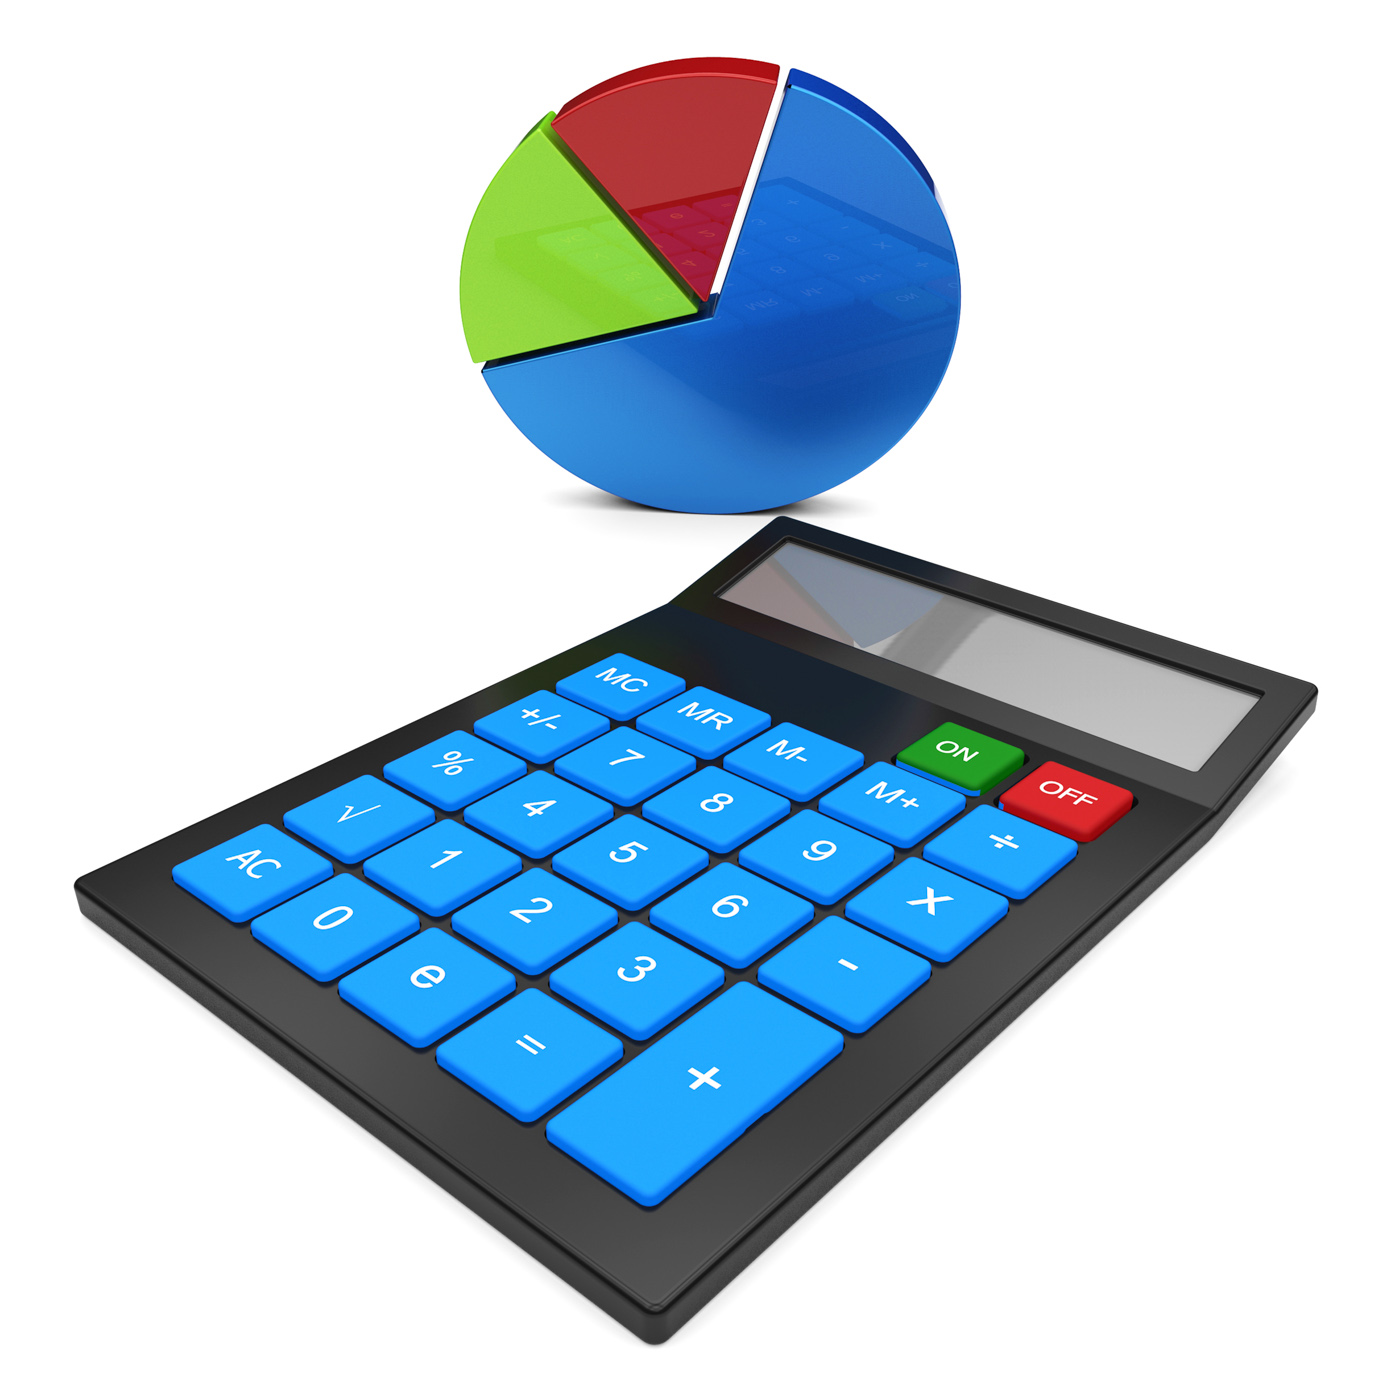 Calculate Statistics Shows Calculated Data And Statistical, Accounting, Calculate, Calculation, Calculator, HQ Photo